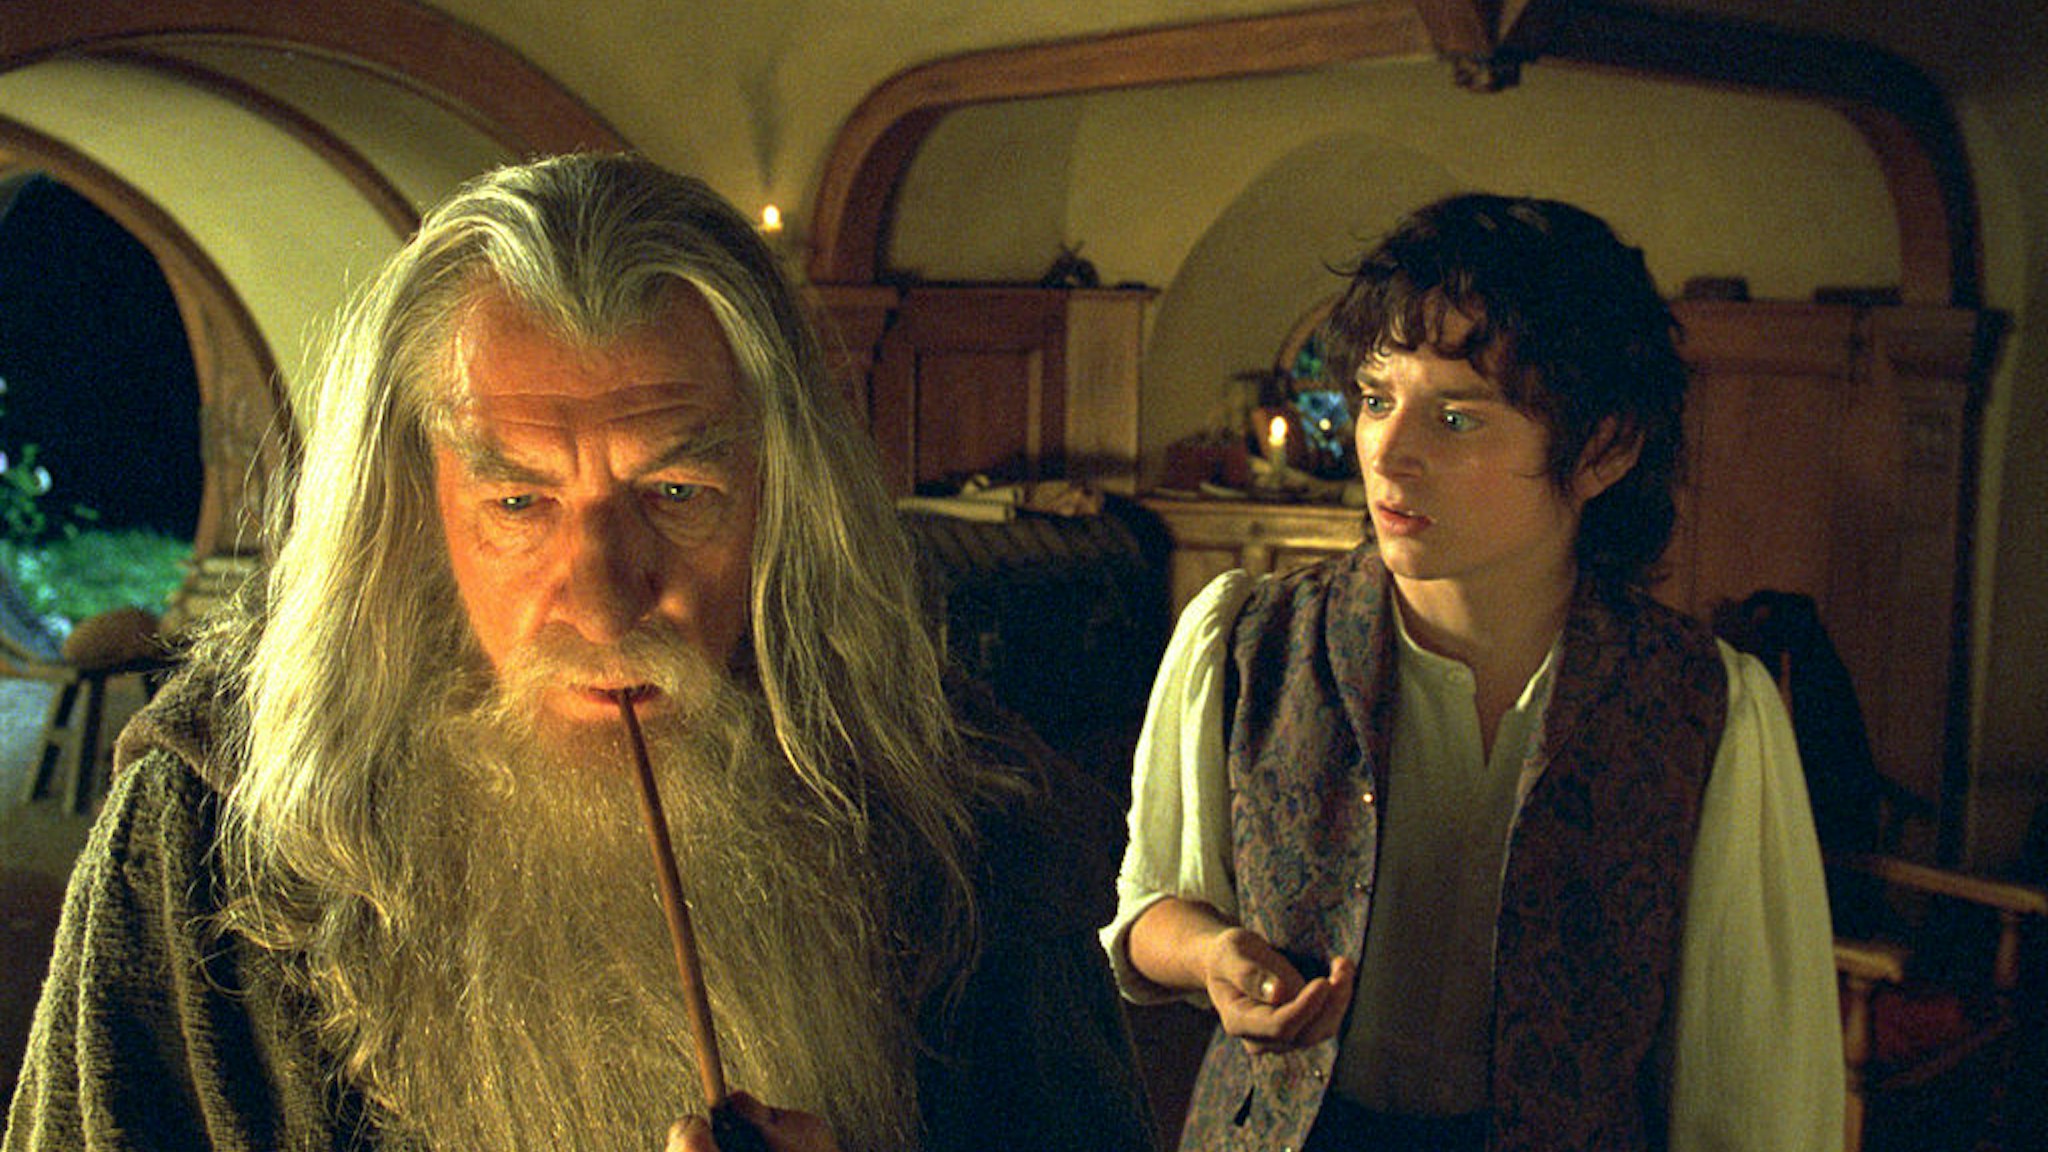 Academy Award? nominee Fran Walsh &amp; Philippa Boyens &amp; Peter Jackson for Best Adapted Screenplay in New Line Cinema's epic adventure, "The Lord of the Rings: The Fellowship of the Ring." Pictured is Best Supporting Actor nominee Ian McKellen (L) as Gandalf with Elijah Wood as Frodo. (Photo by New Line/WireImage)